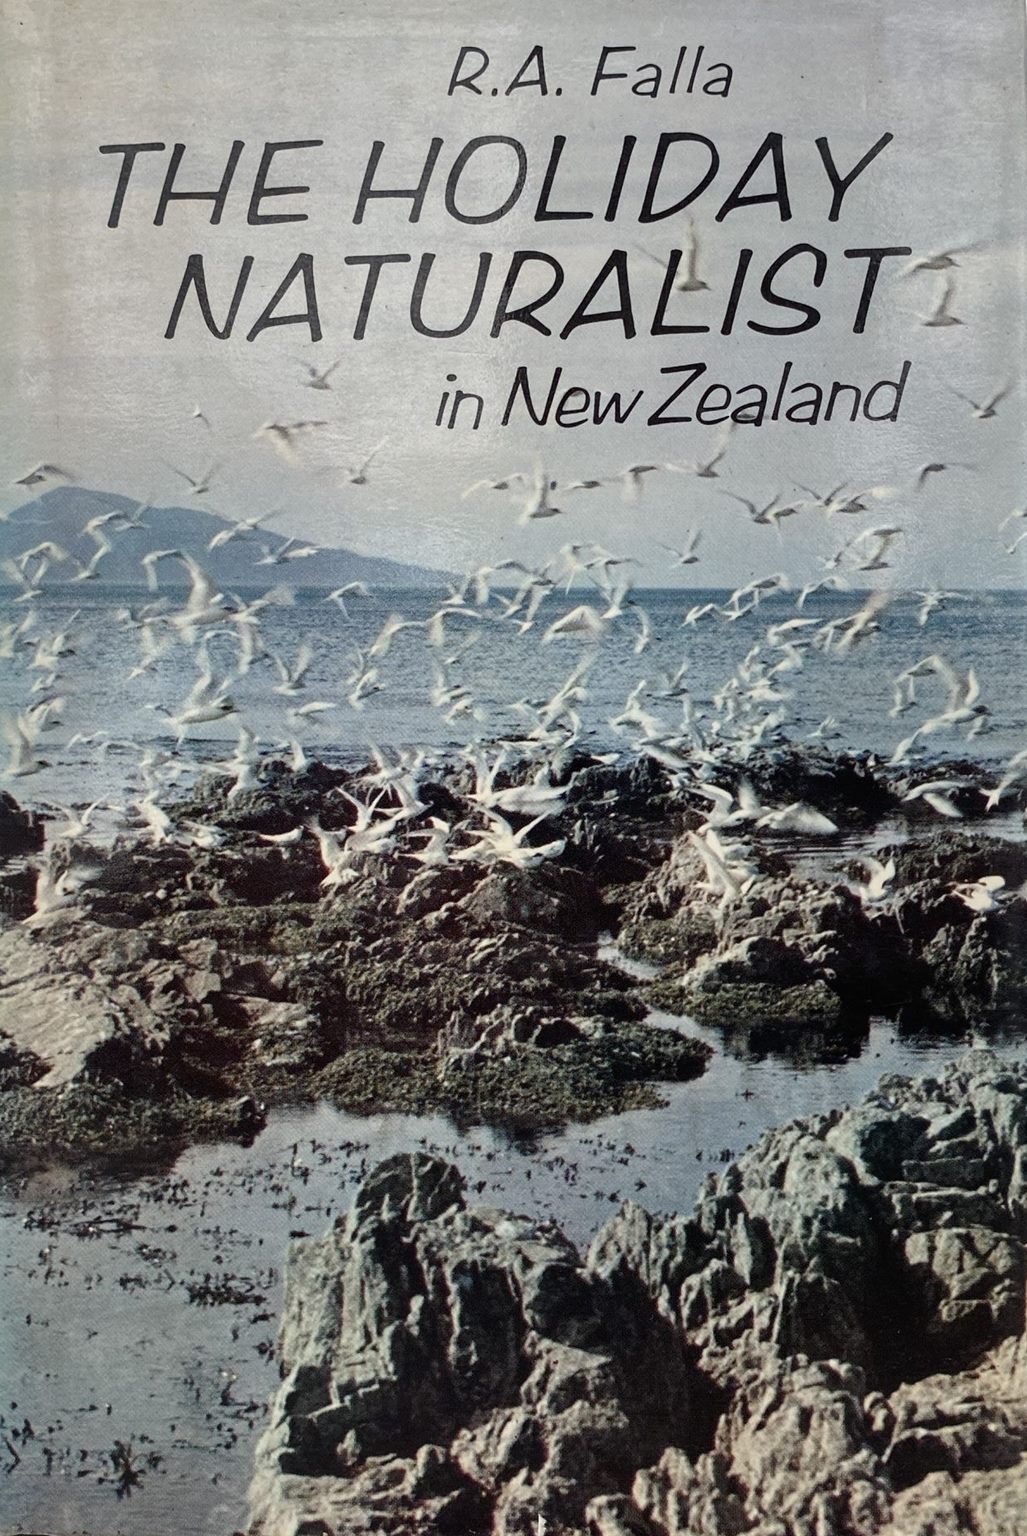 THE HOLIDAY NATURALIST